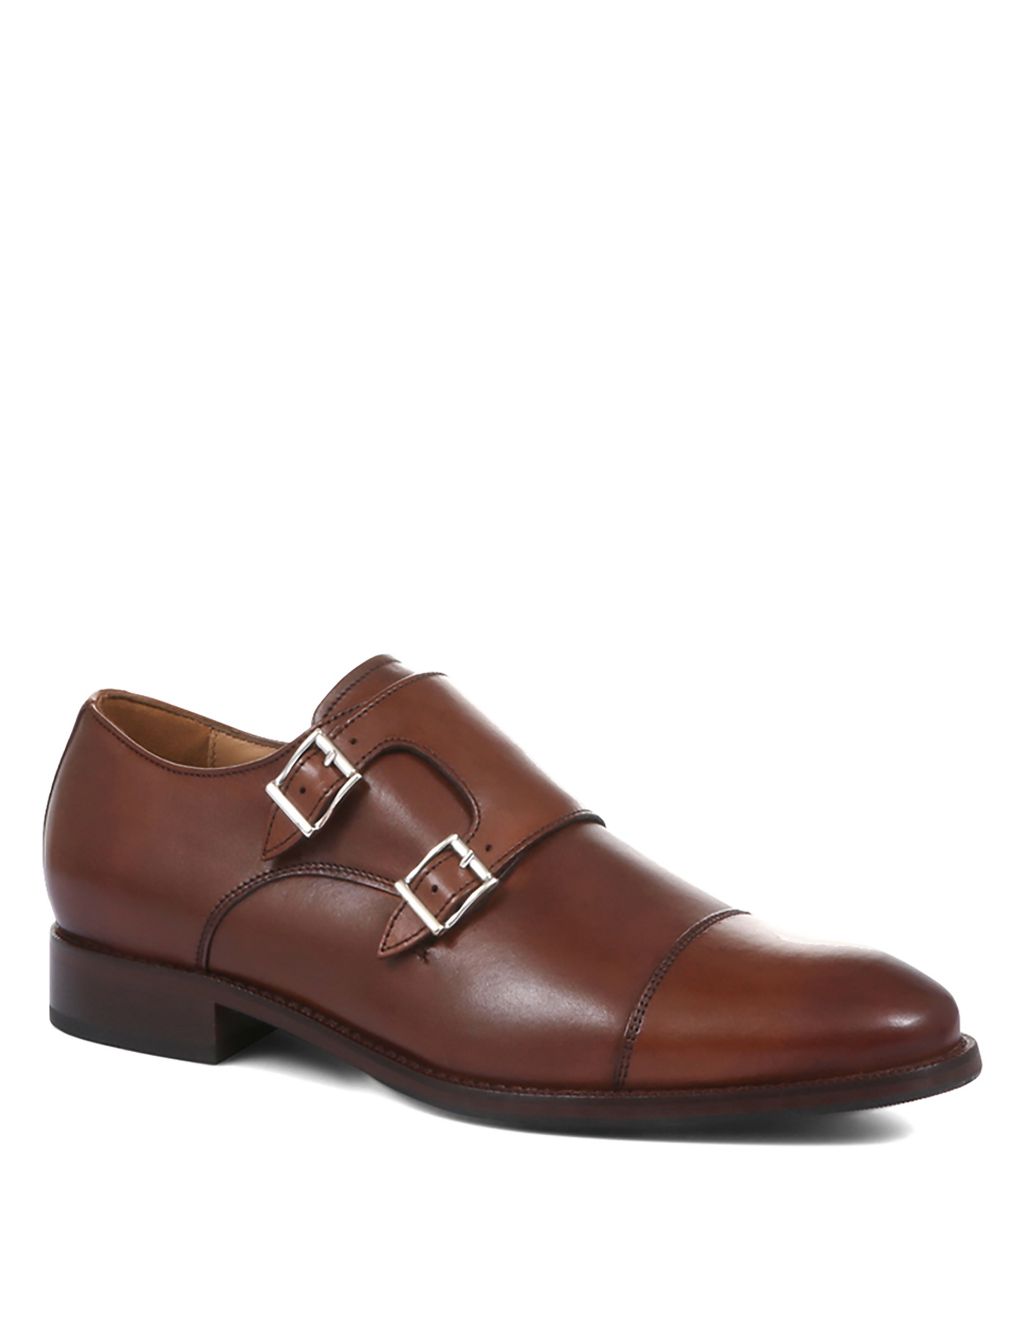 Leather Double Monk Strap Shoes image 2